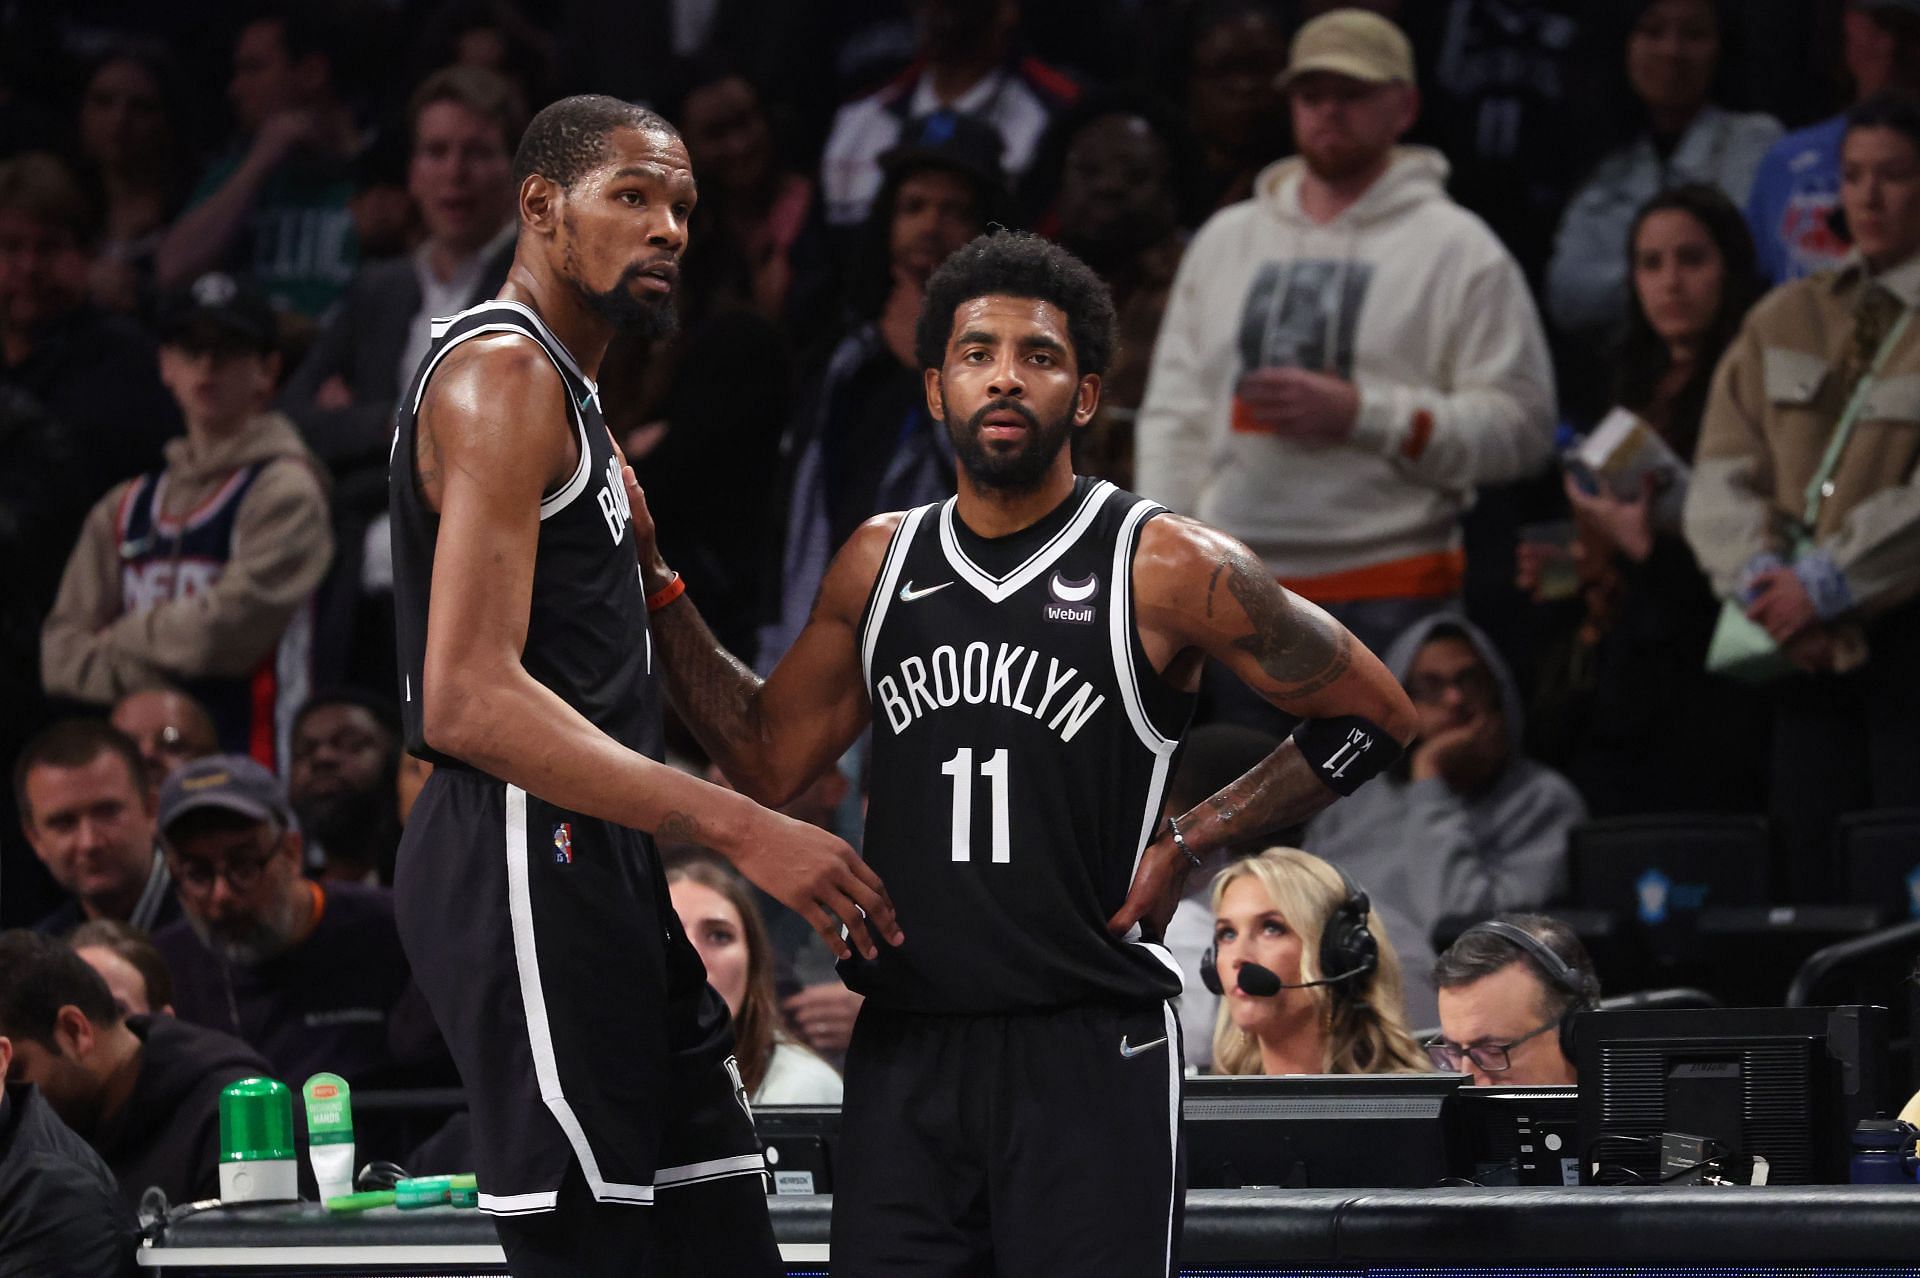 Kevin Durant and Kyrie Irving (right) of the Brooklyn Nets